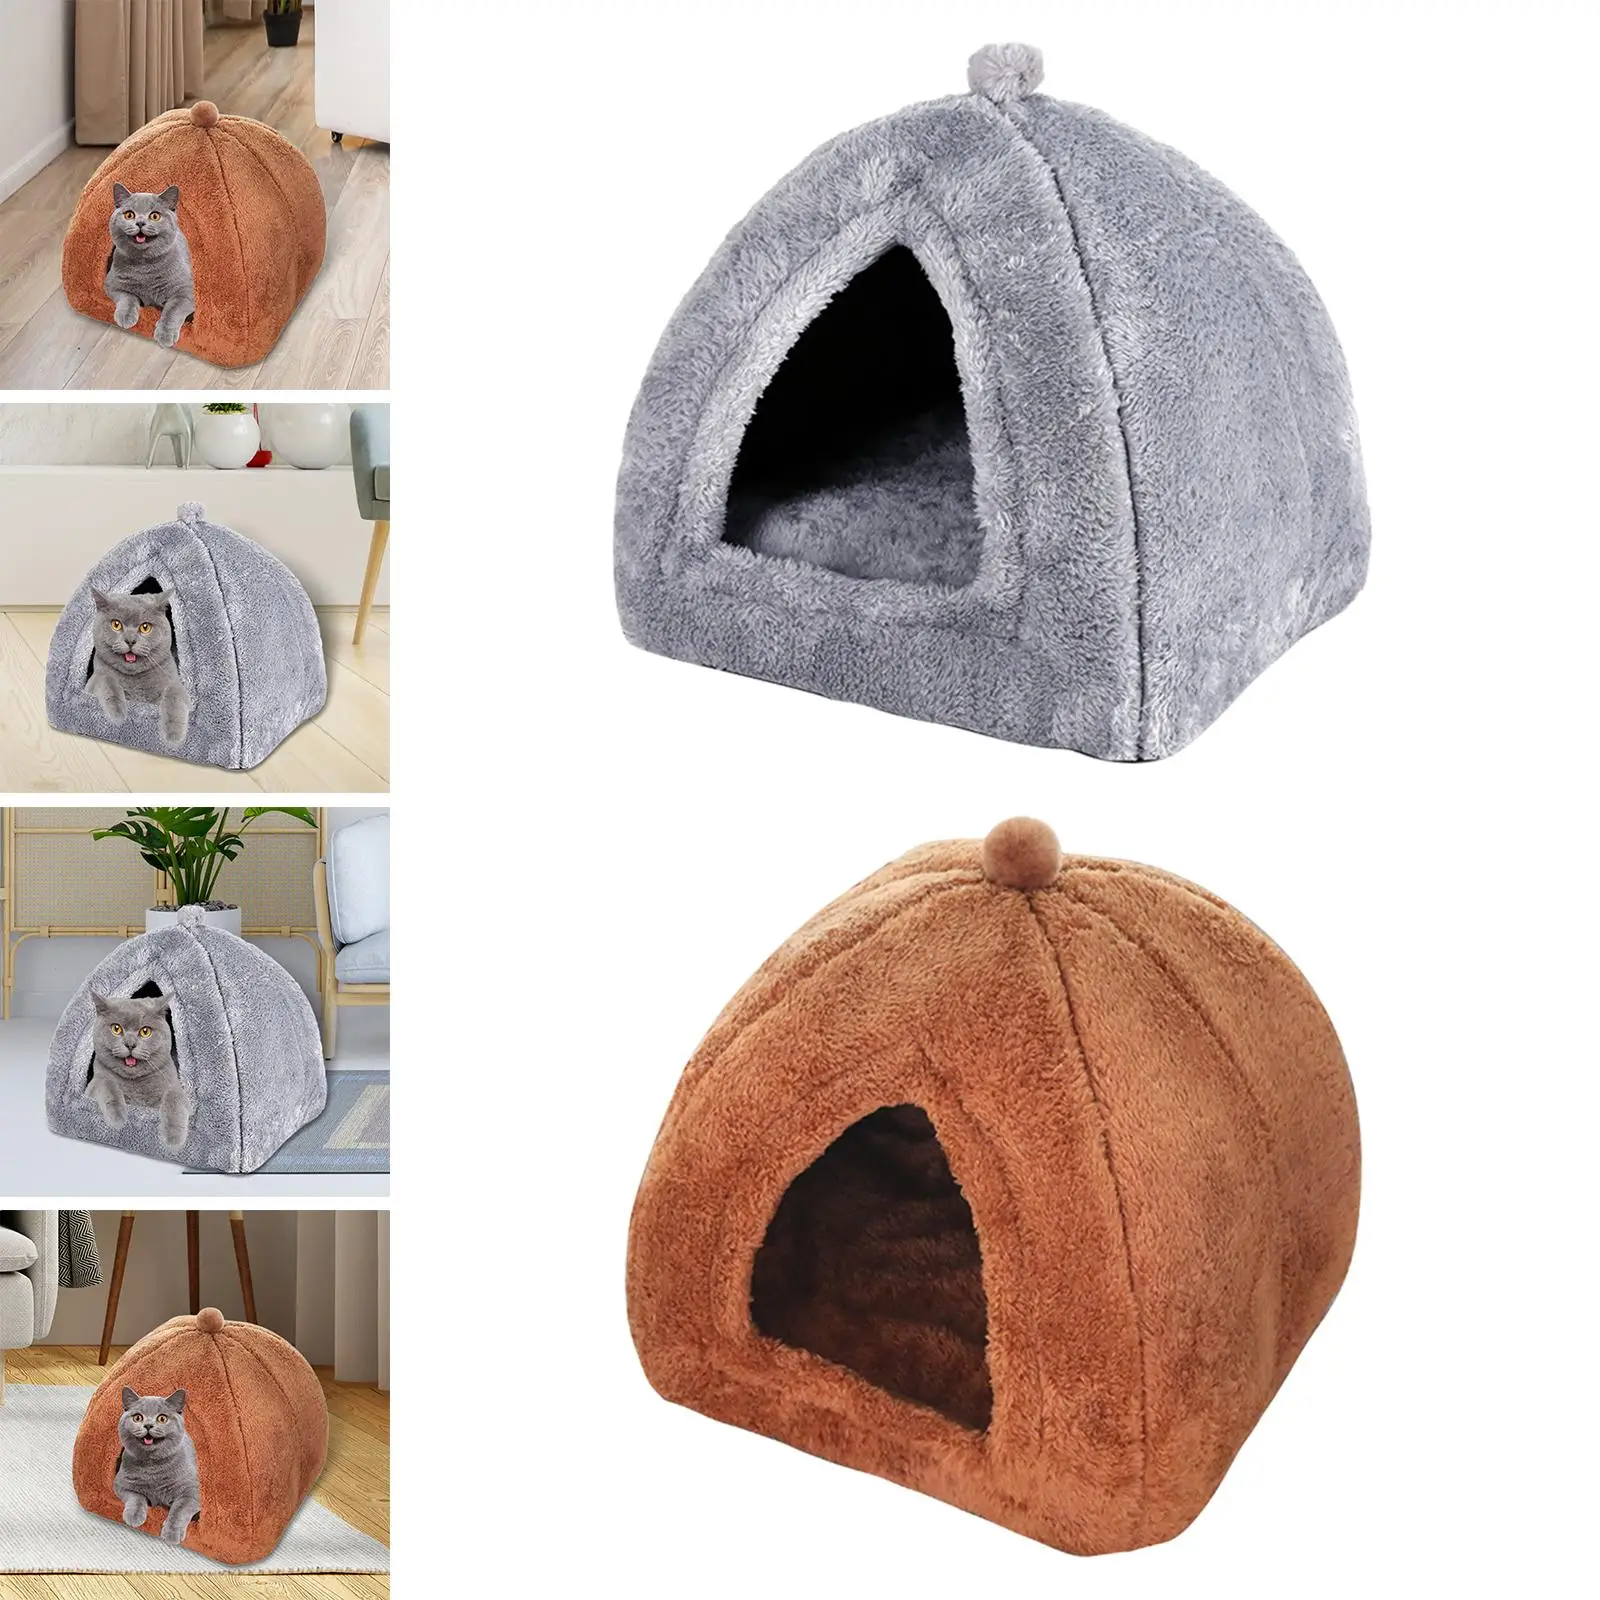 Plush cave Bed Pet Bed Sleeping Warm with non Slip Bottom Cushion Calming Play Rest Soft Triangle for Small Animals Rabbits